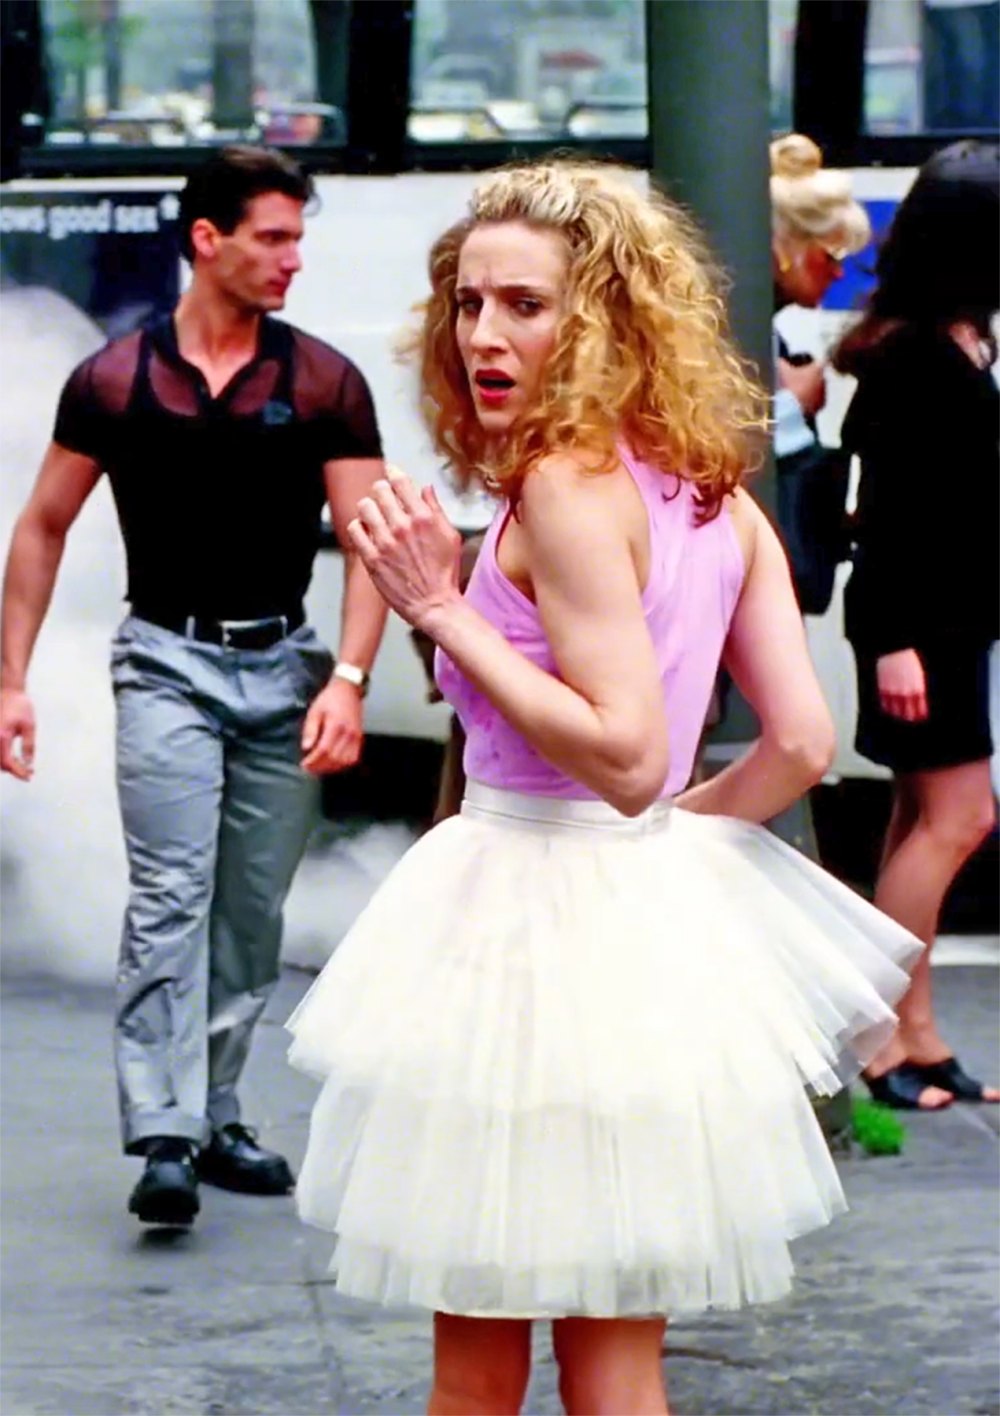 Carrie Bradshaw Iconic Sex and the City Tutu Sells